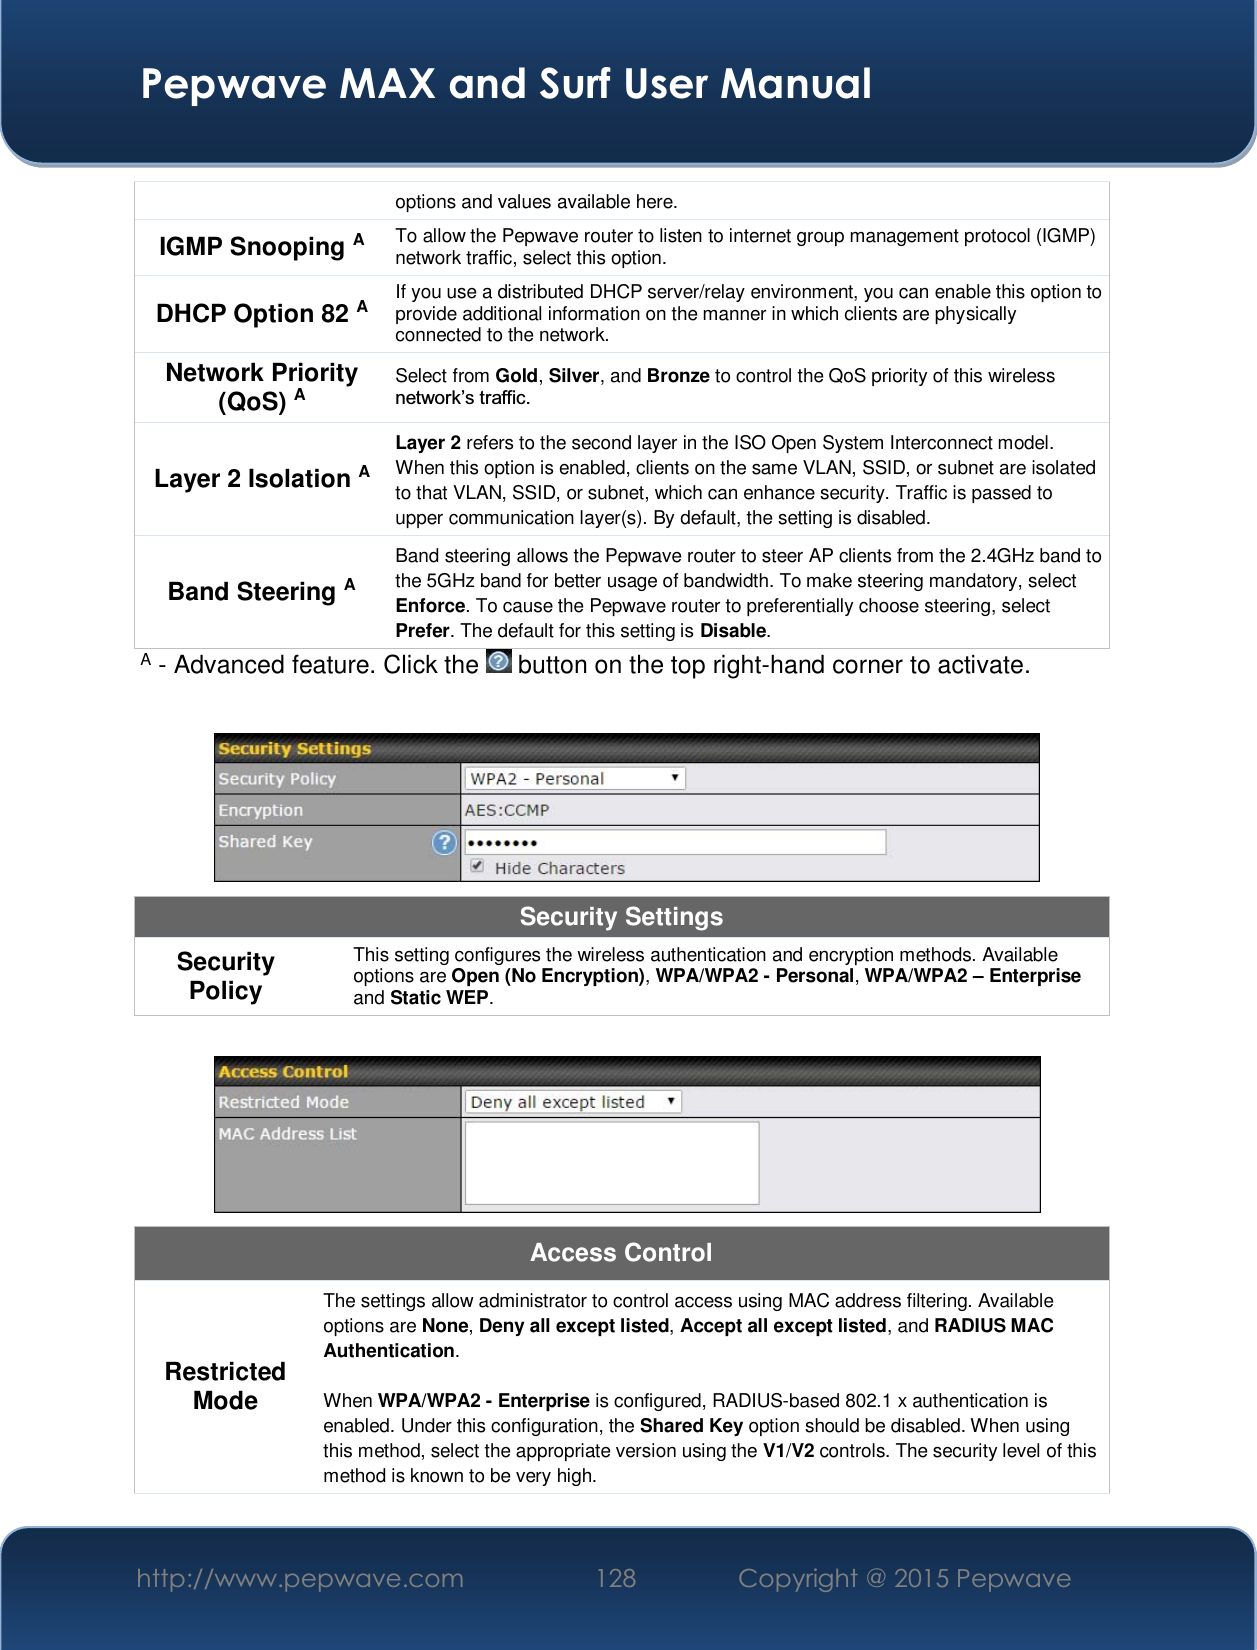  Pepwave MAX and Surf User Manual http://www.pepwave.com  128    Copyright @ 2015 Pepwave   options and values available here. IGMP Snooping A To allow the Pepwave router to listen to internet group management protocol (IGMP) network traffic, select this option. DHCP Option 82 A If you use a distributed DHCP server/relay environment, you can enable this option to provide additional information on the manner in which clients are physically connected to the network. Network Priority (QoS) A Select from Gold, Silver, and Bronze to control the QoS priority of this wireless QHWZRUN¶VWUDIILF Layer 2 Isolation A Layer 2 refers to the second layer in the ISO Open System Interconnect model. When this option is enabled, clients on the same VLAN, SSID, or subnet are isolated to that VLAN, SSID, or subnet, which can enhance security. Traffic is passed to upper communication layer(s). By default, the setting is disabled.  Band Steering A Band steering allows the Pepwave router to steer AP clients from the 2.4GHz band to the 5GHz band for better usage of bandwidth. To make steering mandatory, select Enforce. To cause the Pepwave router to preferentially choose steering, select Prefer. The default for this setting is Disable. A - Advanced feature. Click the   button on the top right-hand corner to activate.   Security Settings Security Policy This setting configures the wireless authentication and encryption methods. Available options are Open (No Encryption), WPA/WPA2 - Personal, WPA/WPA2 ± Enterprise and Static WEP.   Access Control Restricted Mode The settings allow administrator to control access using MAC address filtering. Available options are None, Deny all except listed, Accept all except listed, and RADIUS MAC Authentication.  When WPA/WPA2 - Enterprise is configured, RADIUS-based 802.1 x authentication is enabled. Under this configuration, the Shared Key option should be disabled. When using this method, select the appropriate version using the V1/V2 controls. The security level of this method is known to be very high. 